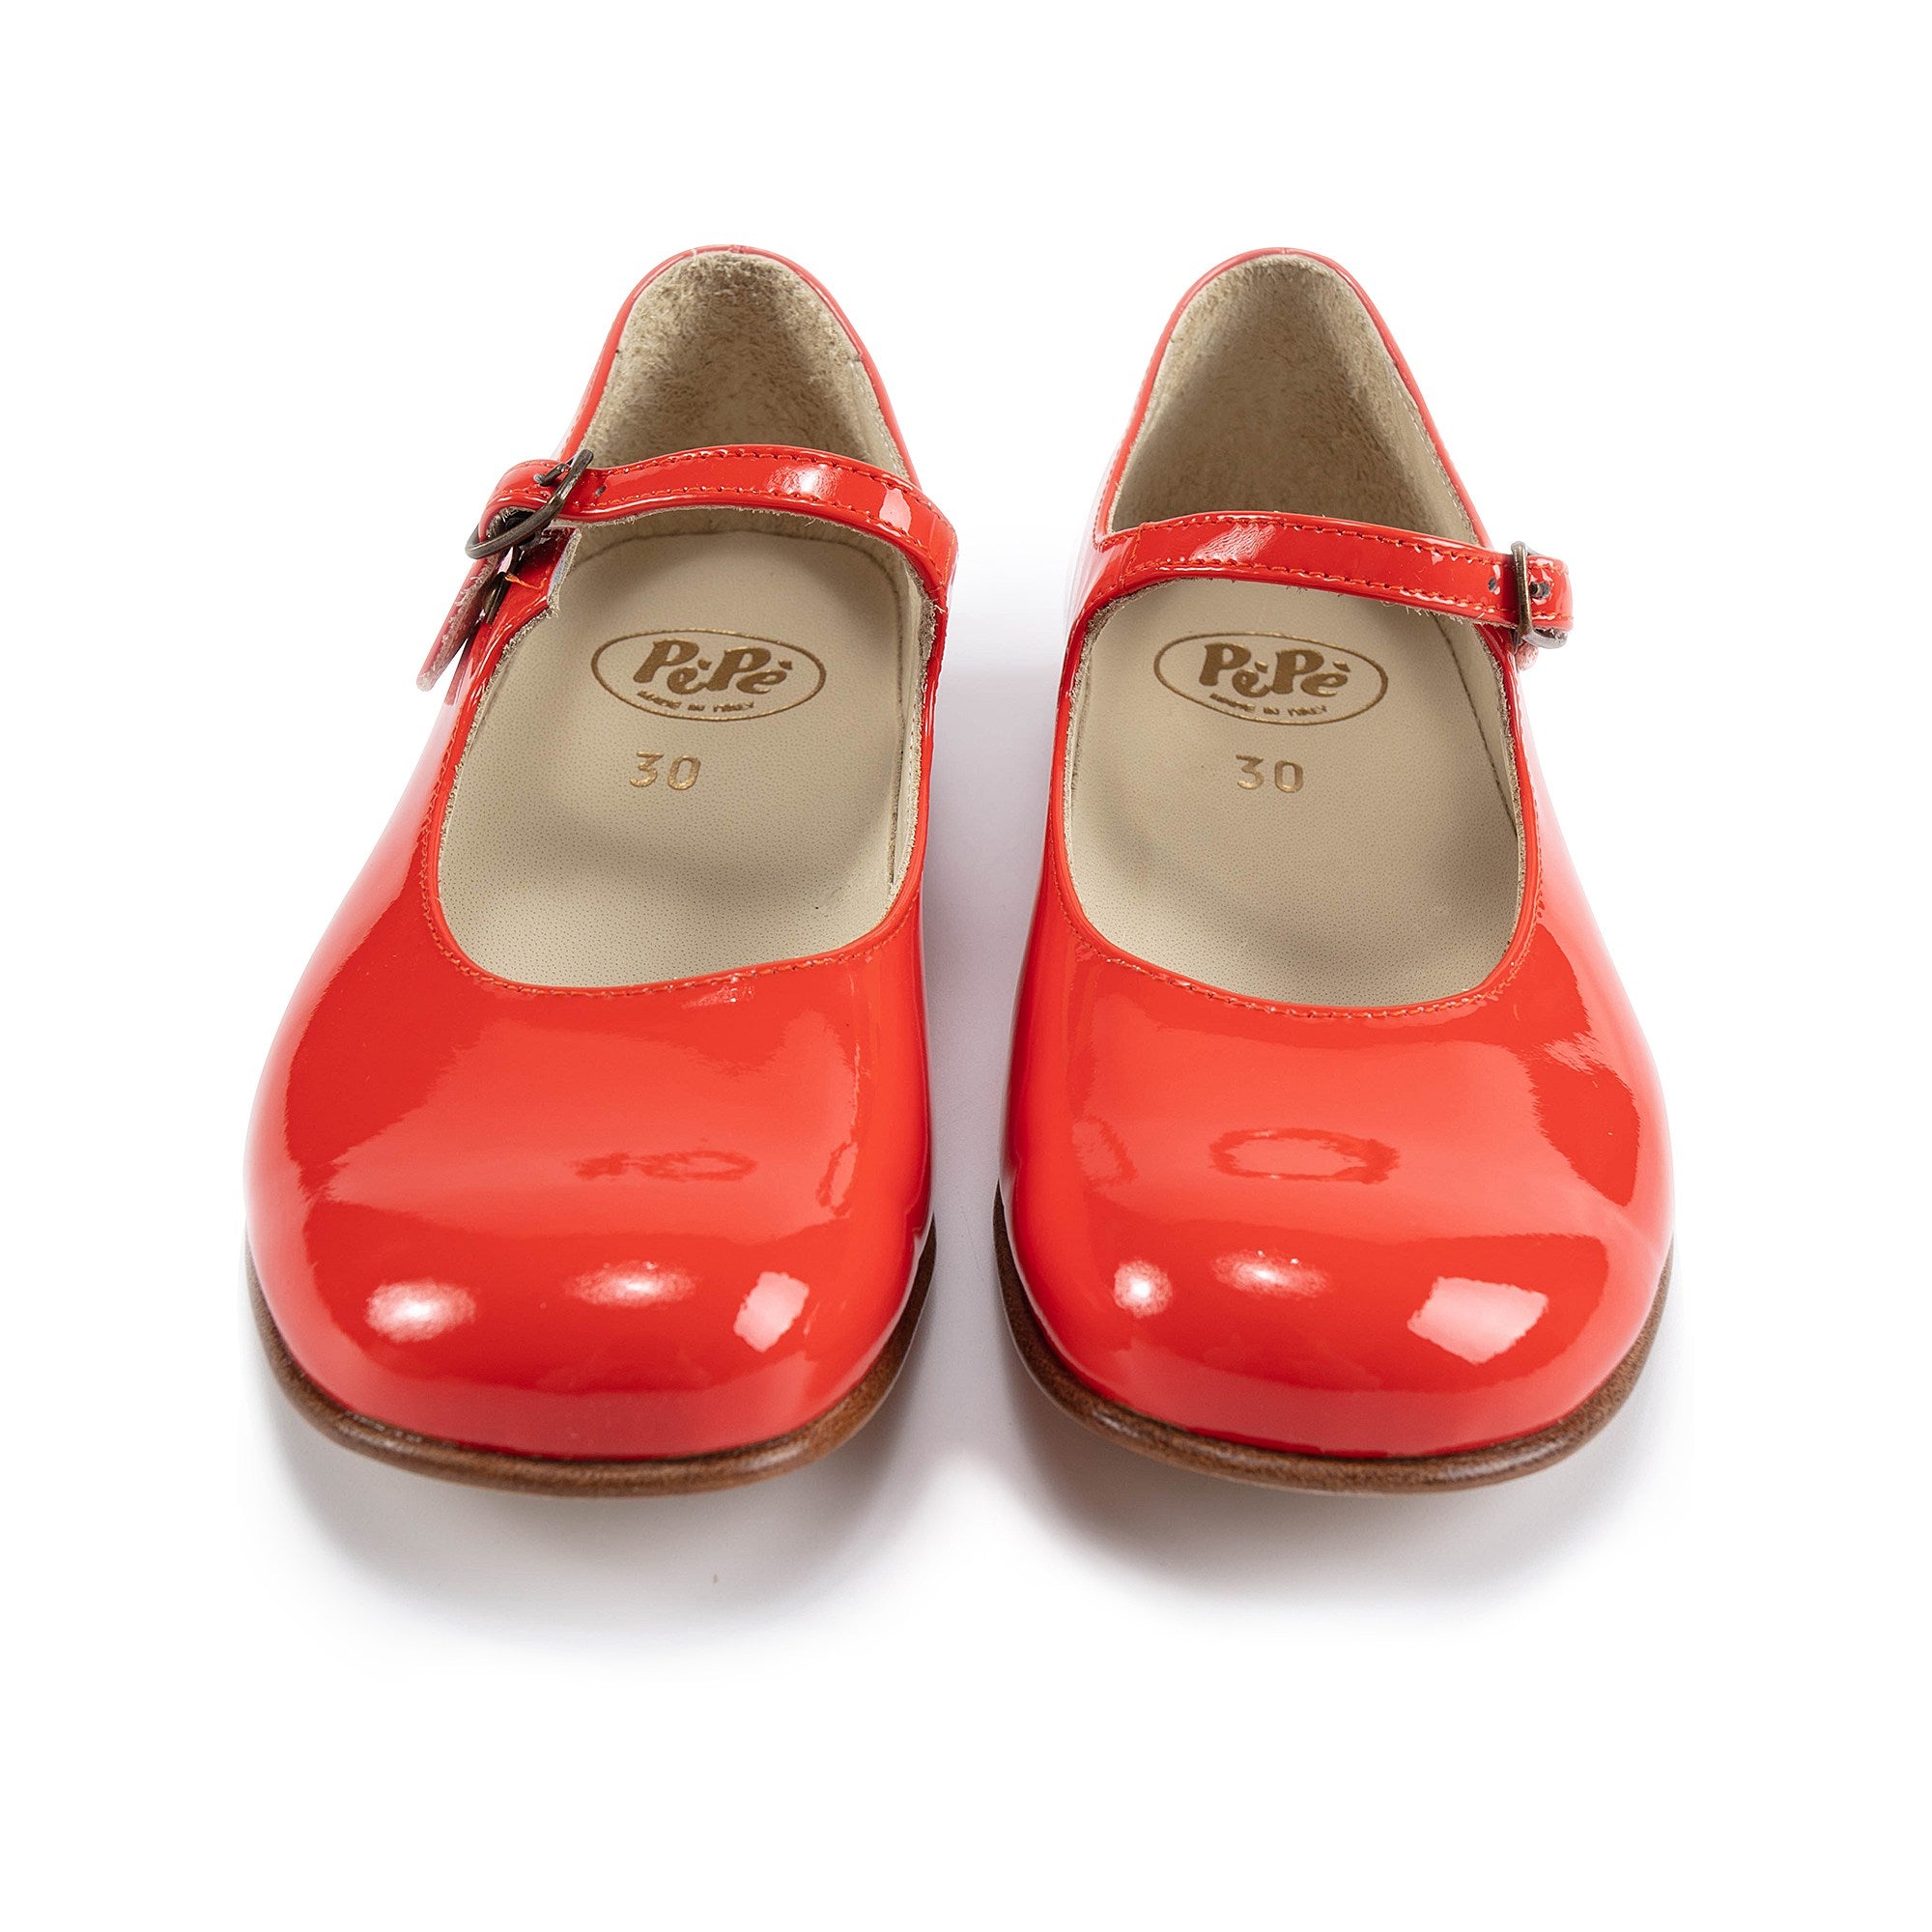 Girls Bright Red Leather Shoes